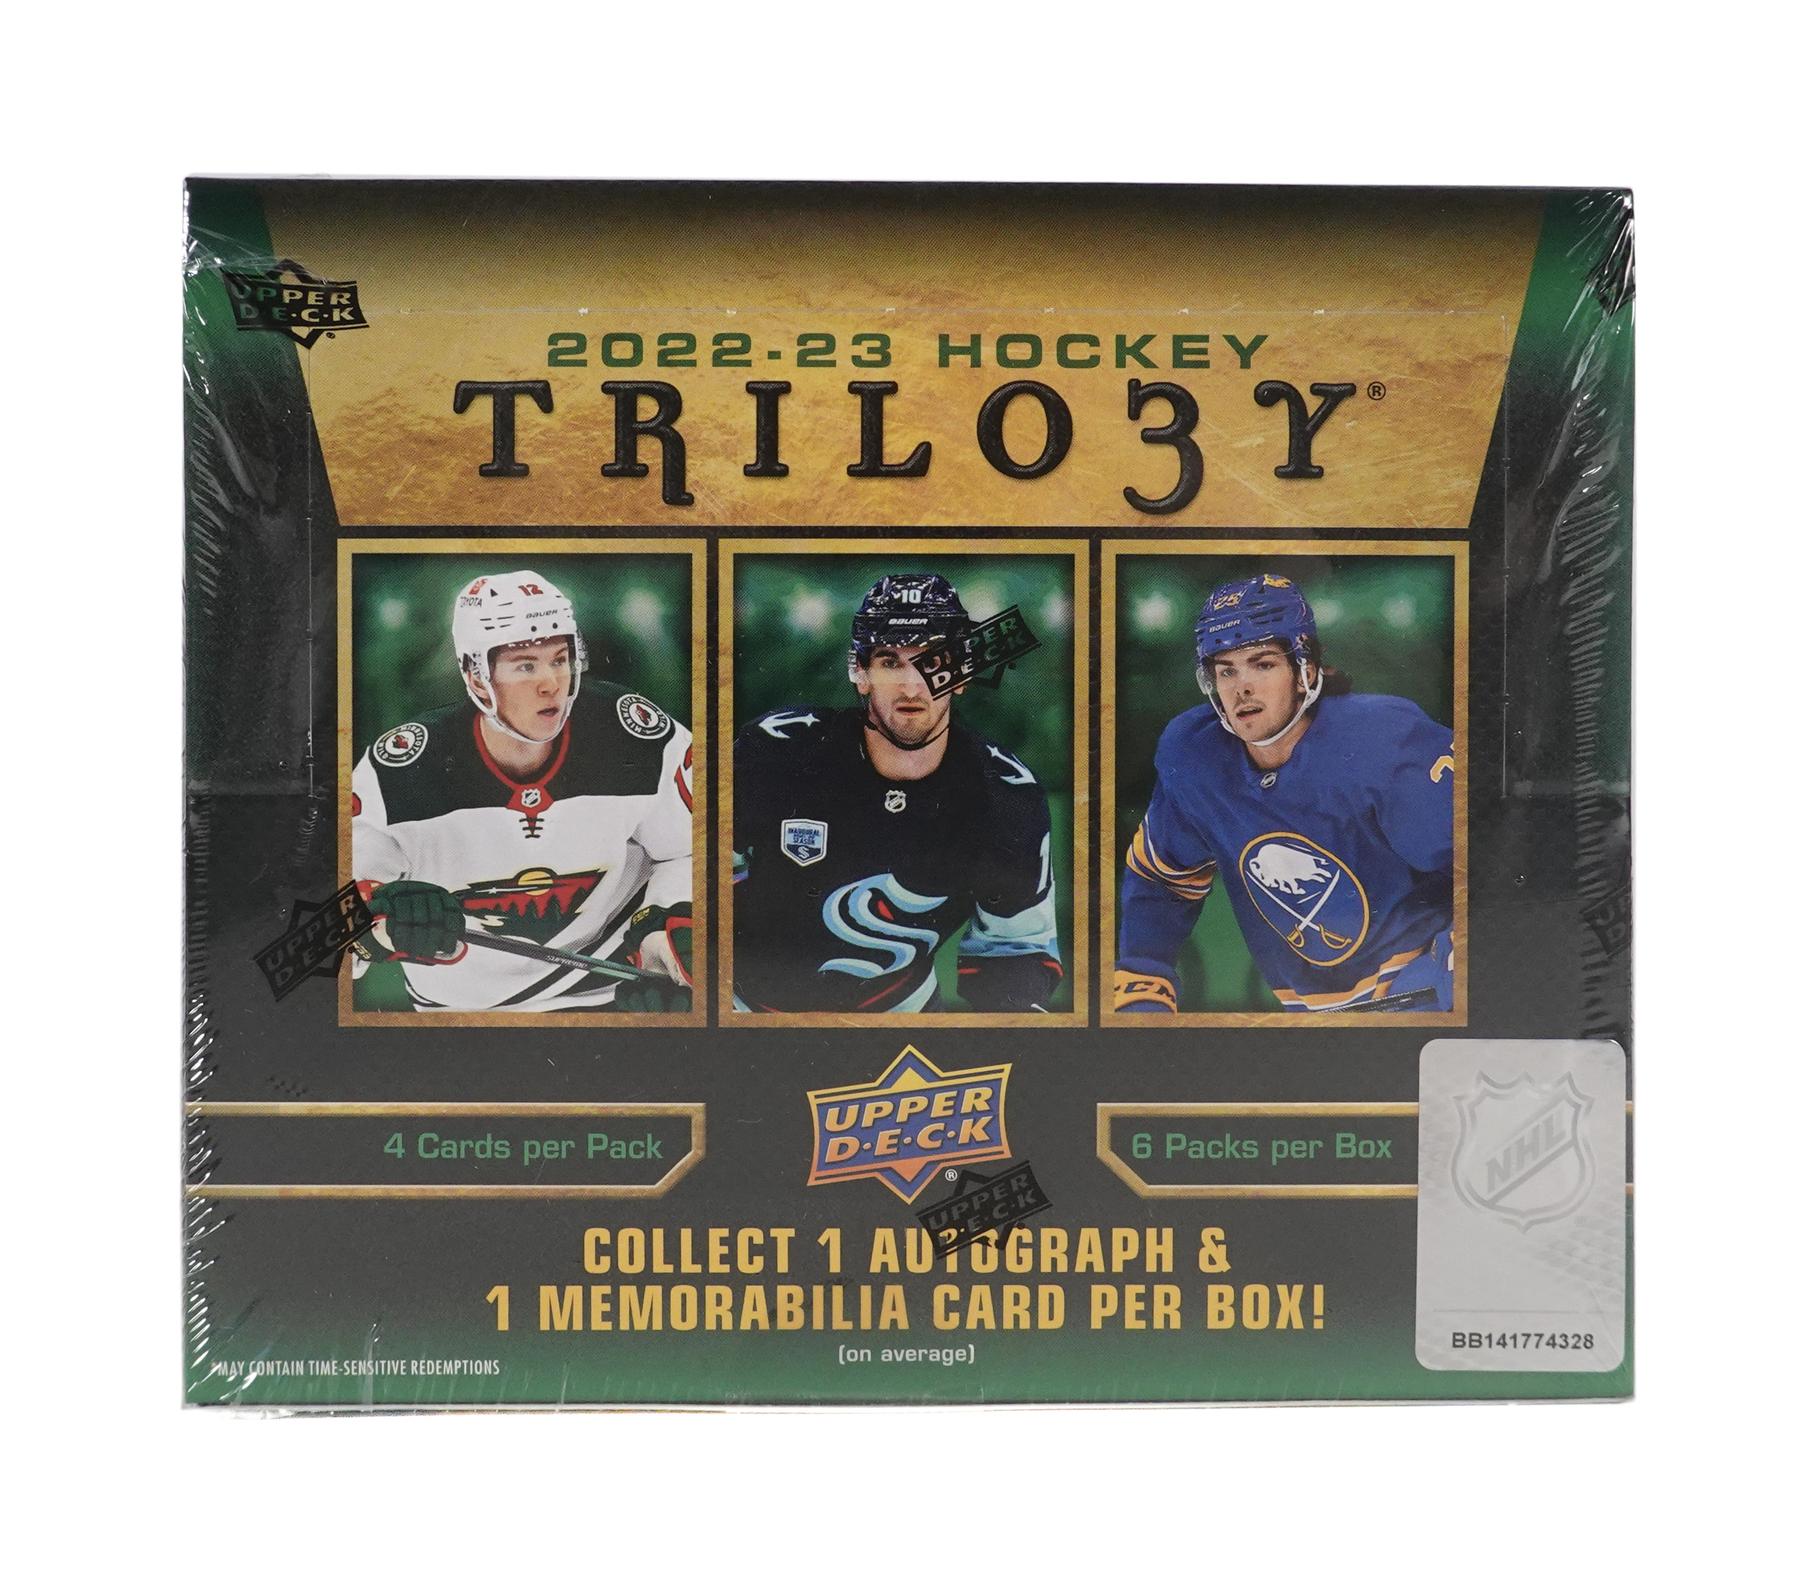 Puck Junk - Hockey cards, collectibles and culture